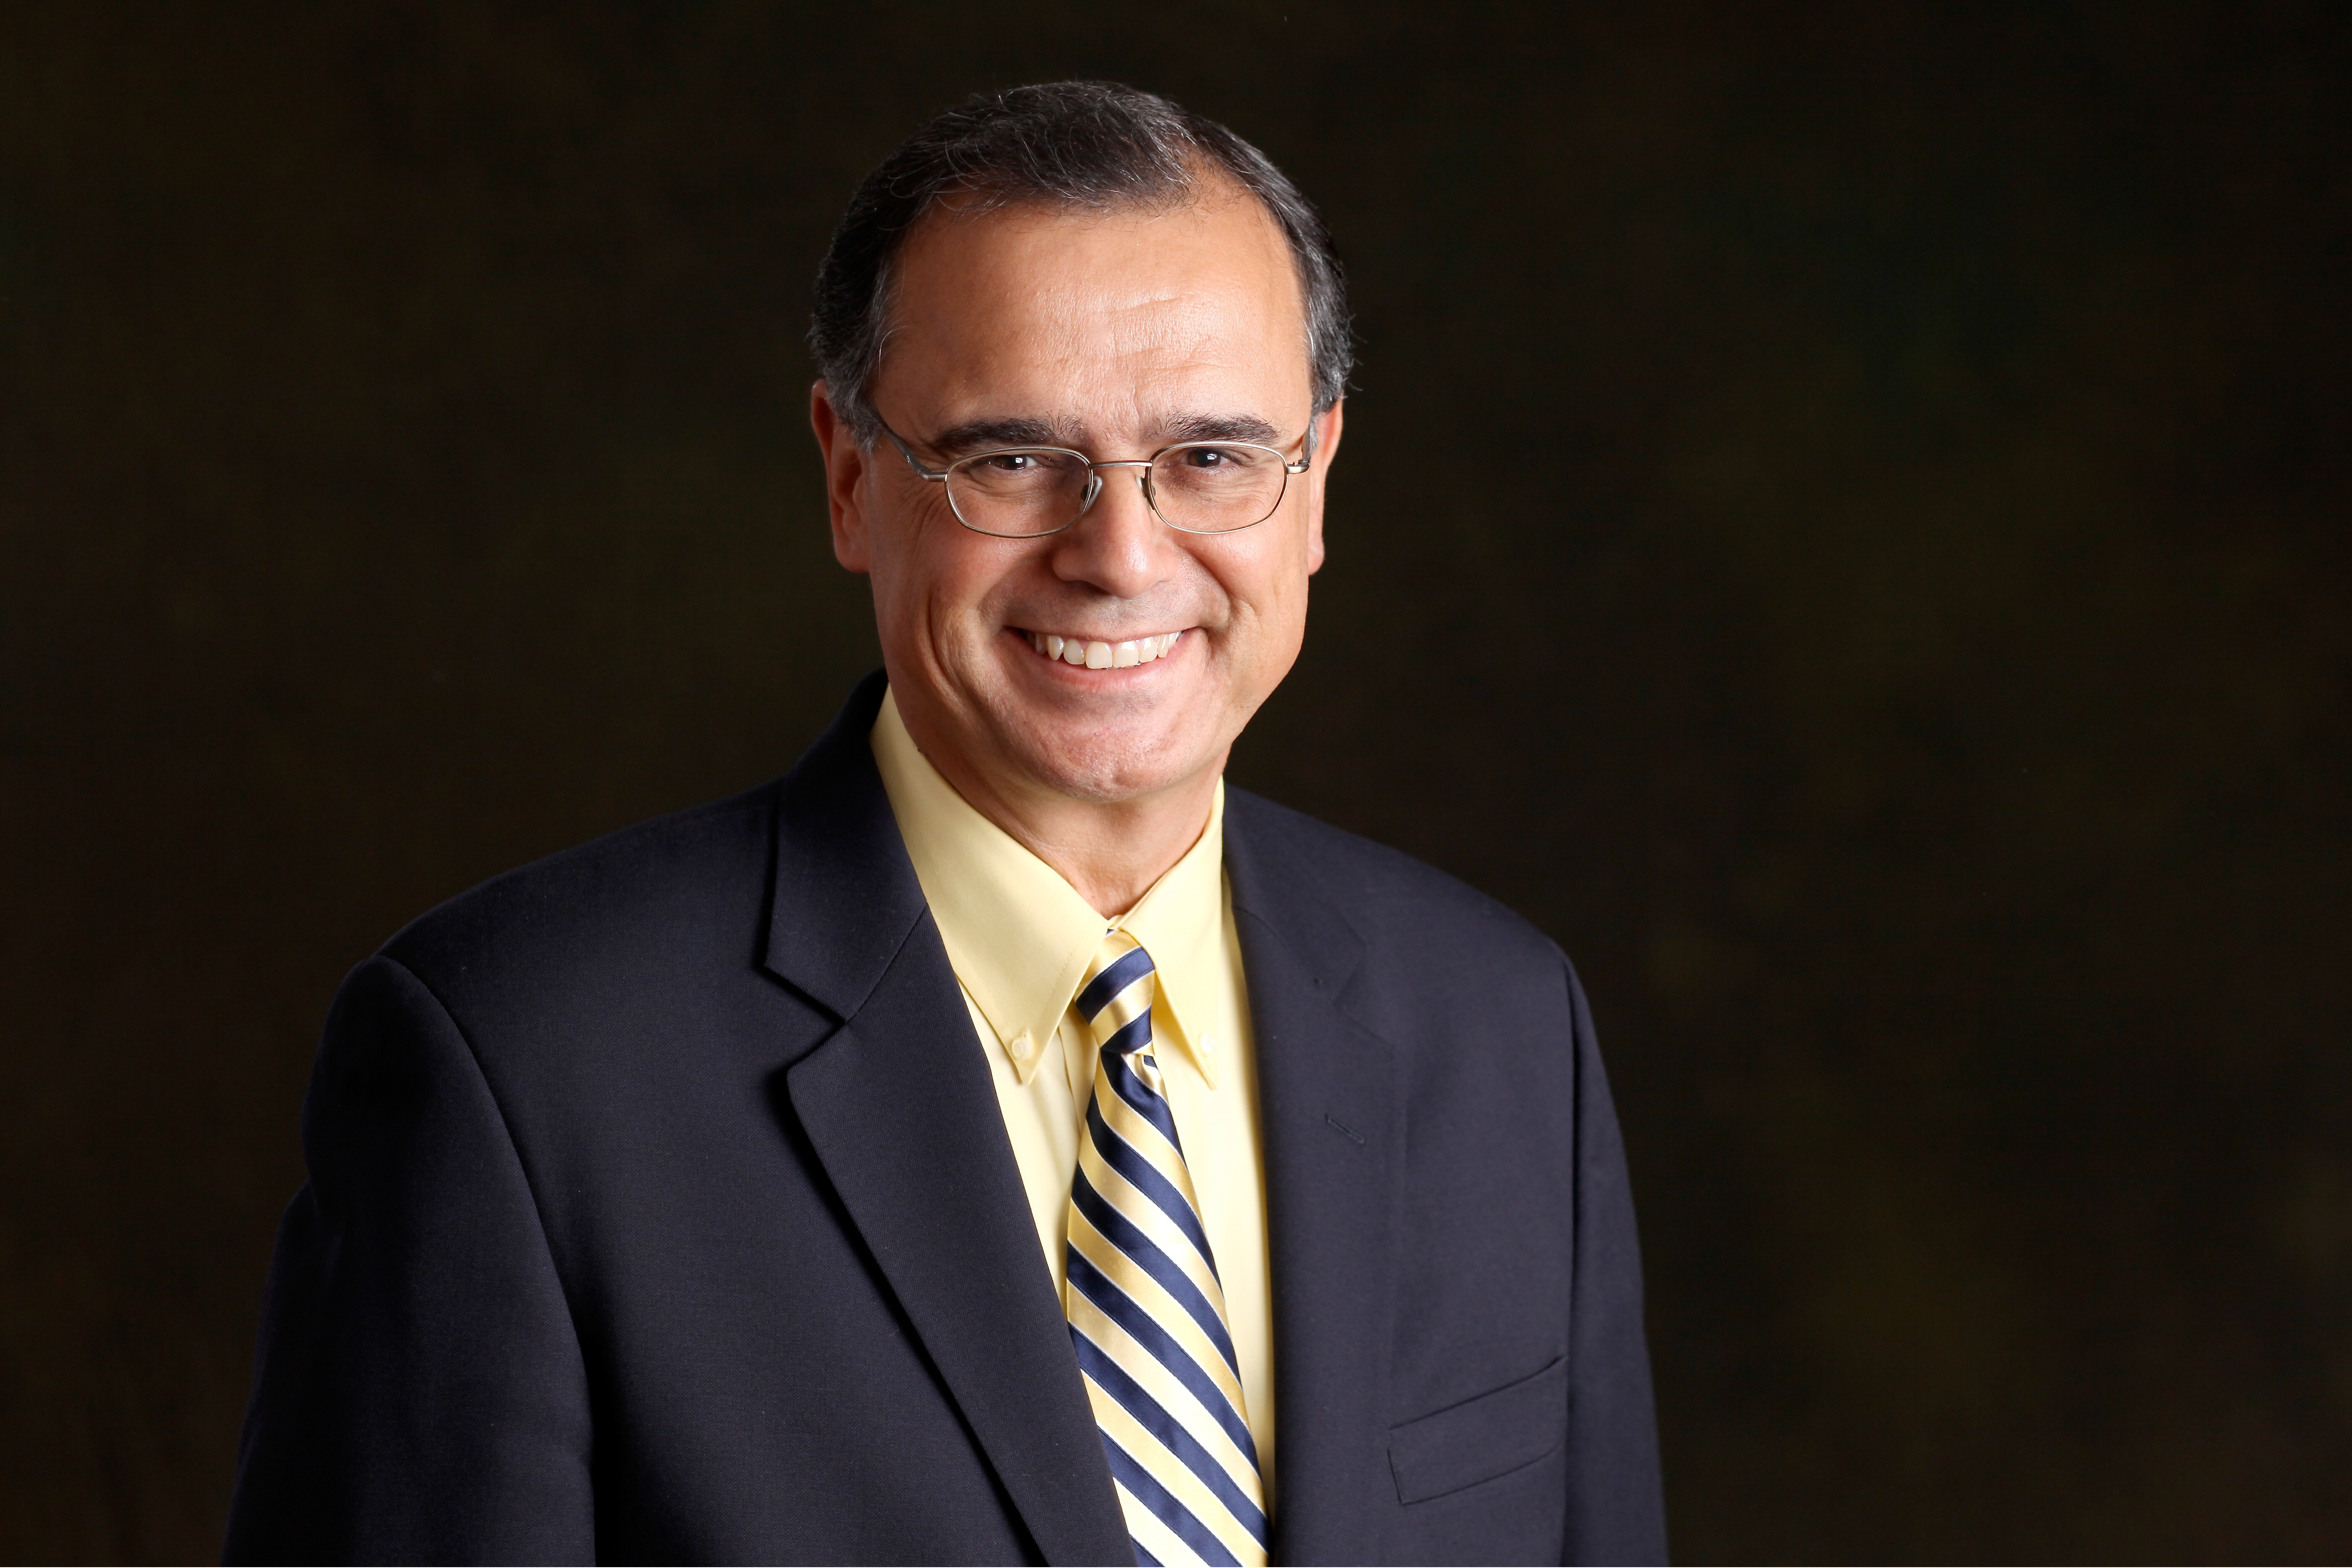 Cover image for  article: Advancing Diversity Inductee:  ANA CEO Bob Liodice